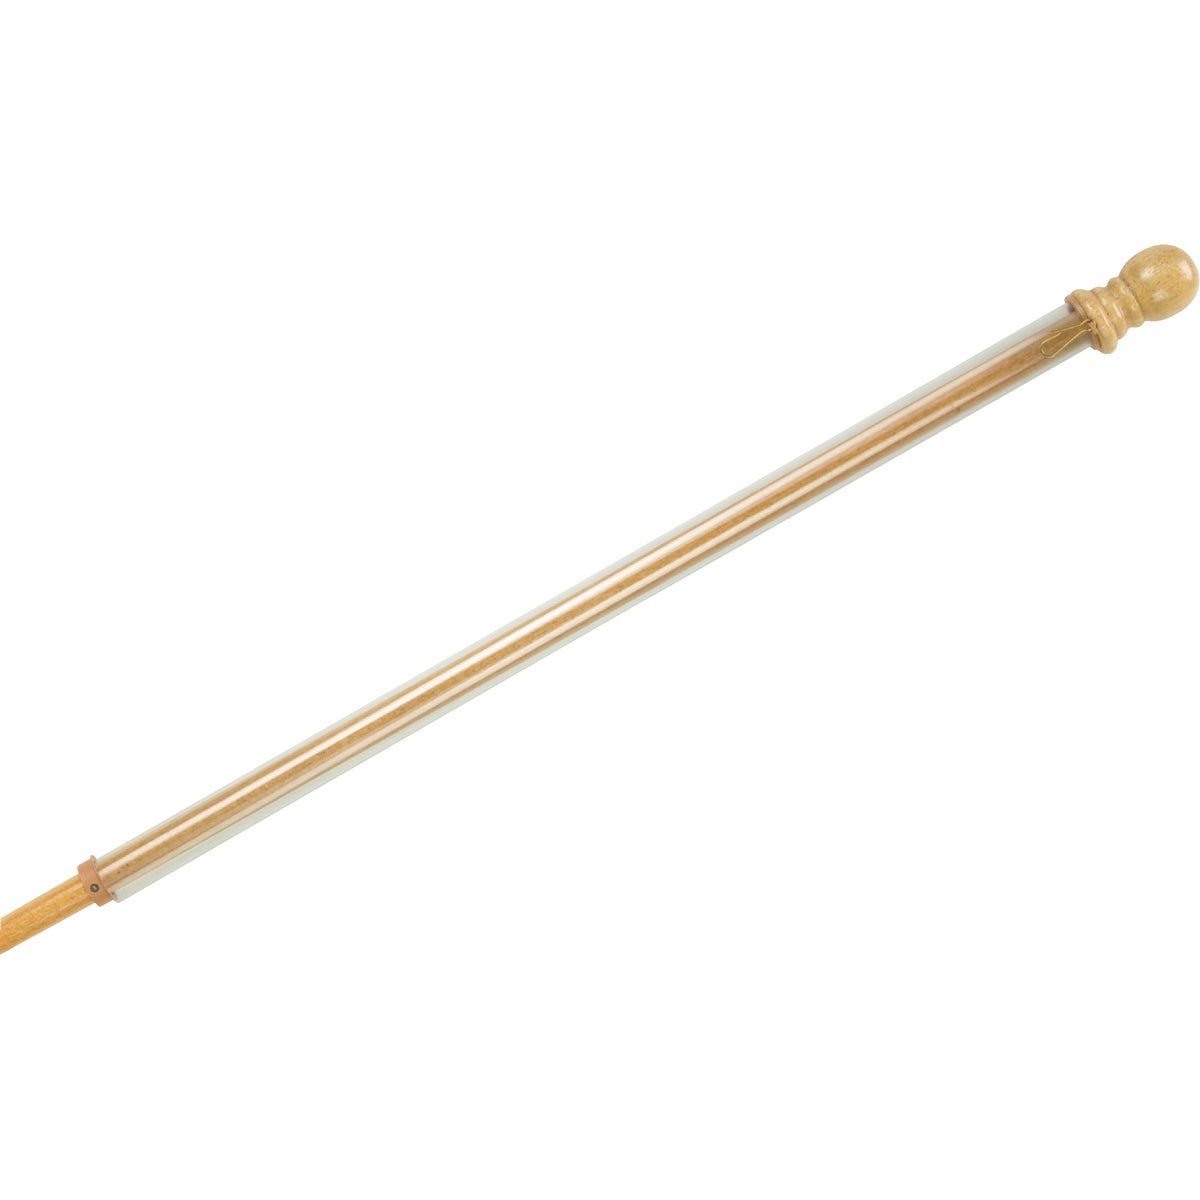 Item 672467, Evergreen 56-inch anti-wrap wood flag pole is a durable flag pole made of 